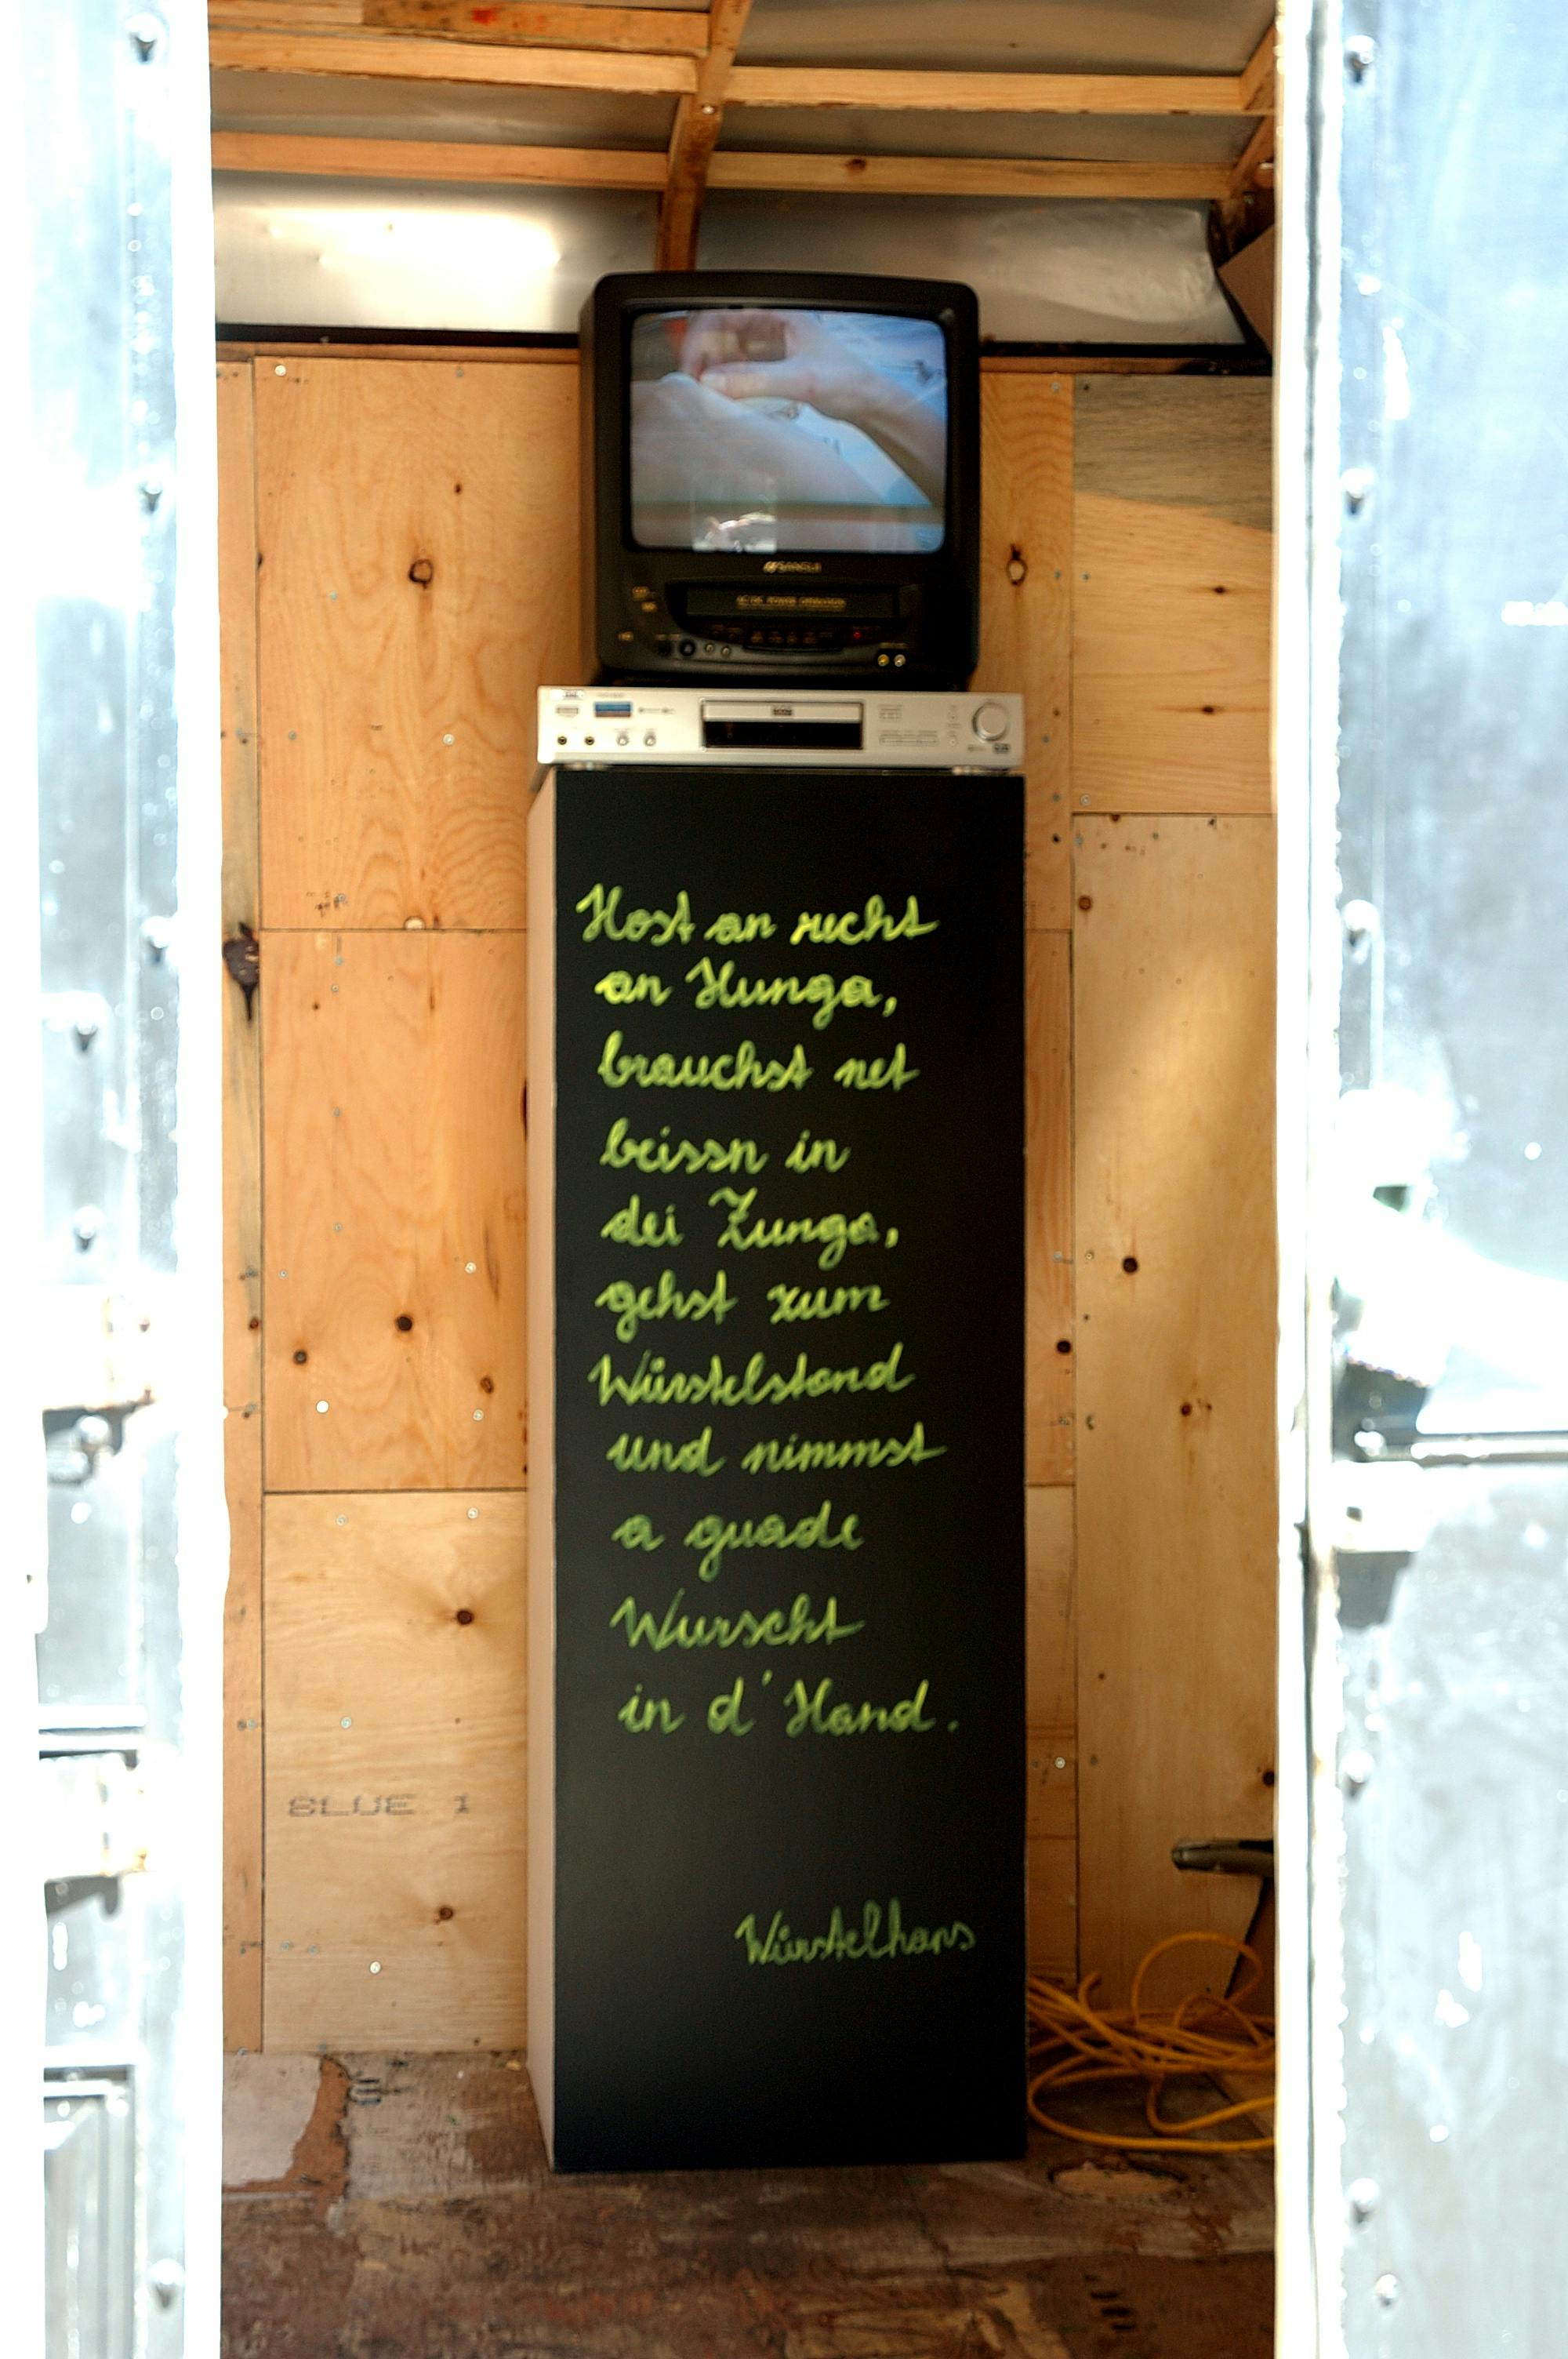 An installation image of an artwork inside storage. A black painted tall pedestal is placed on the floor, on which a poem is handwritten. A CRT TV and a video player are placed on top of this painted pedestal. 